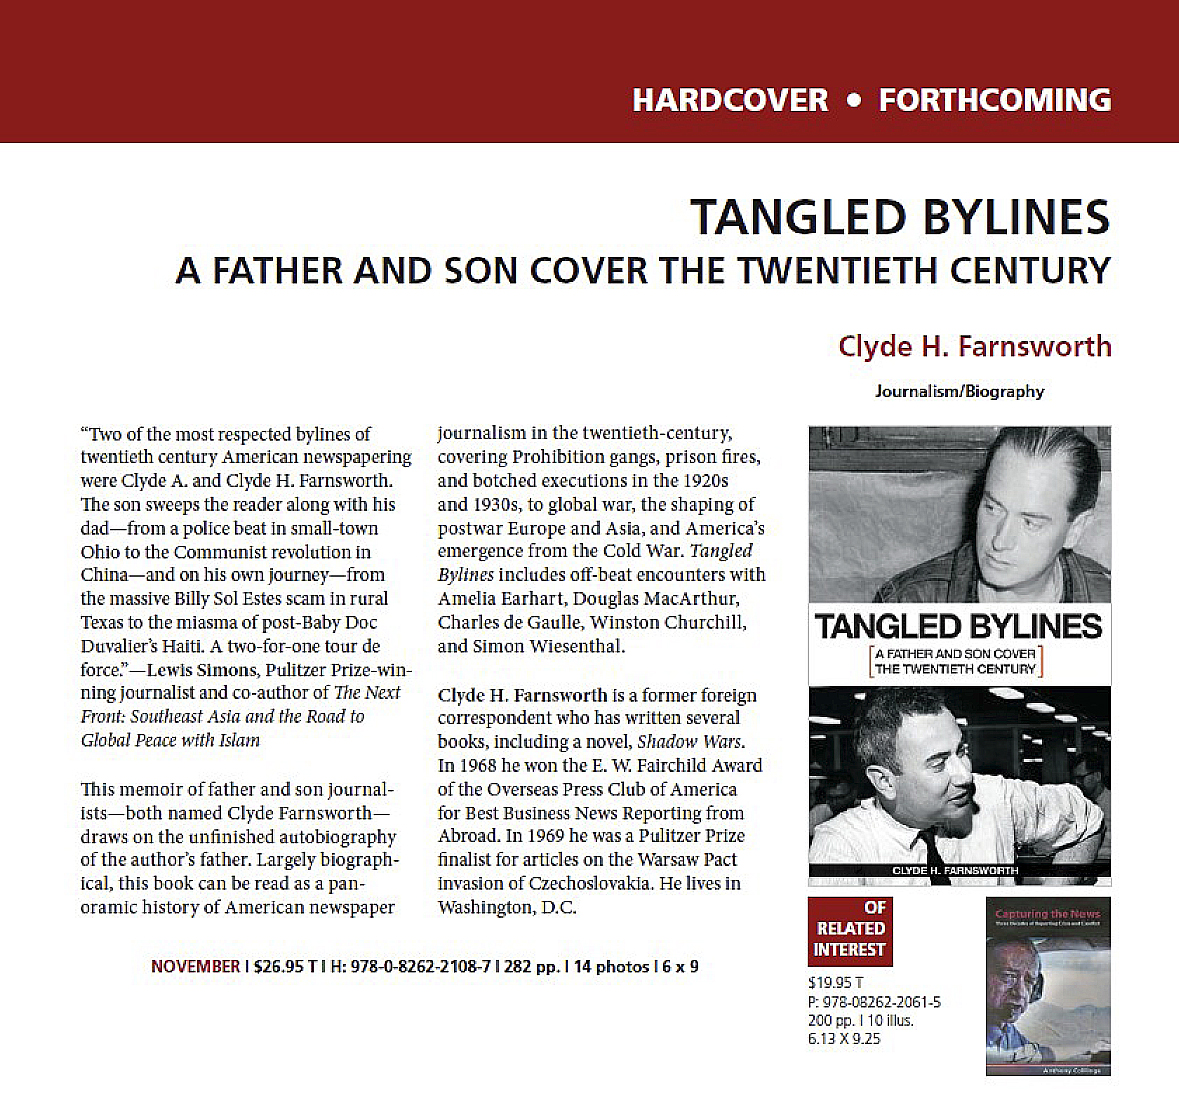 Tangled Bylines Release Notice